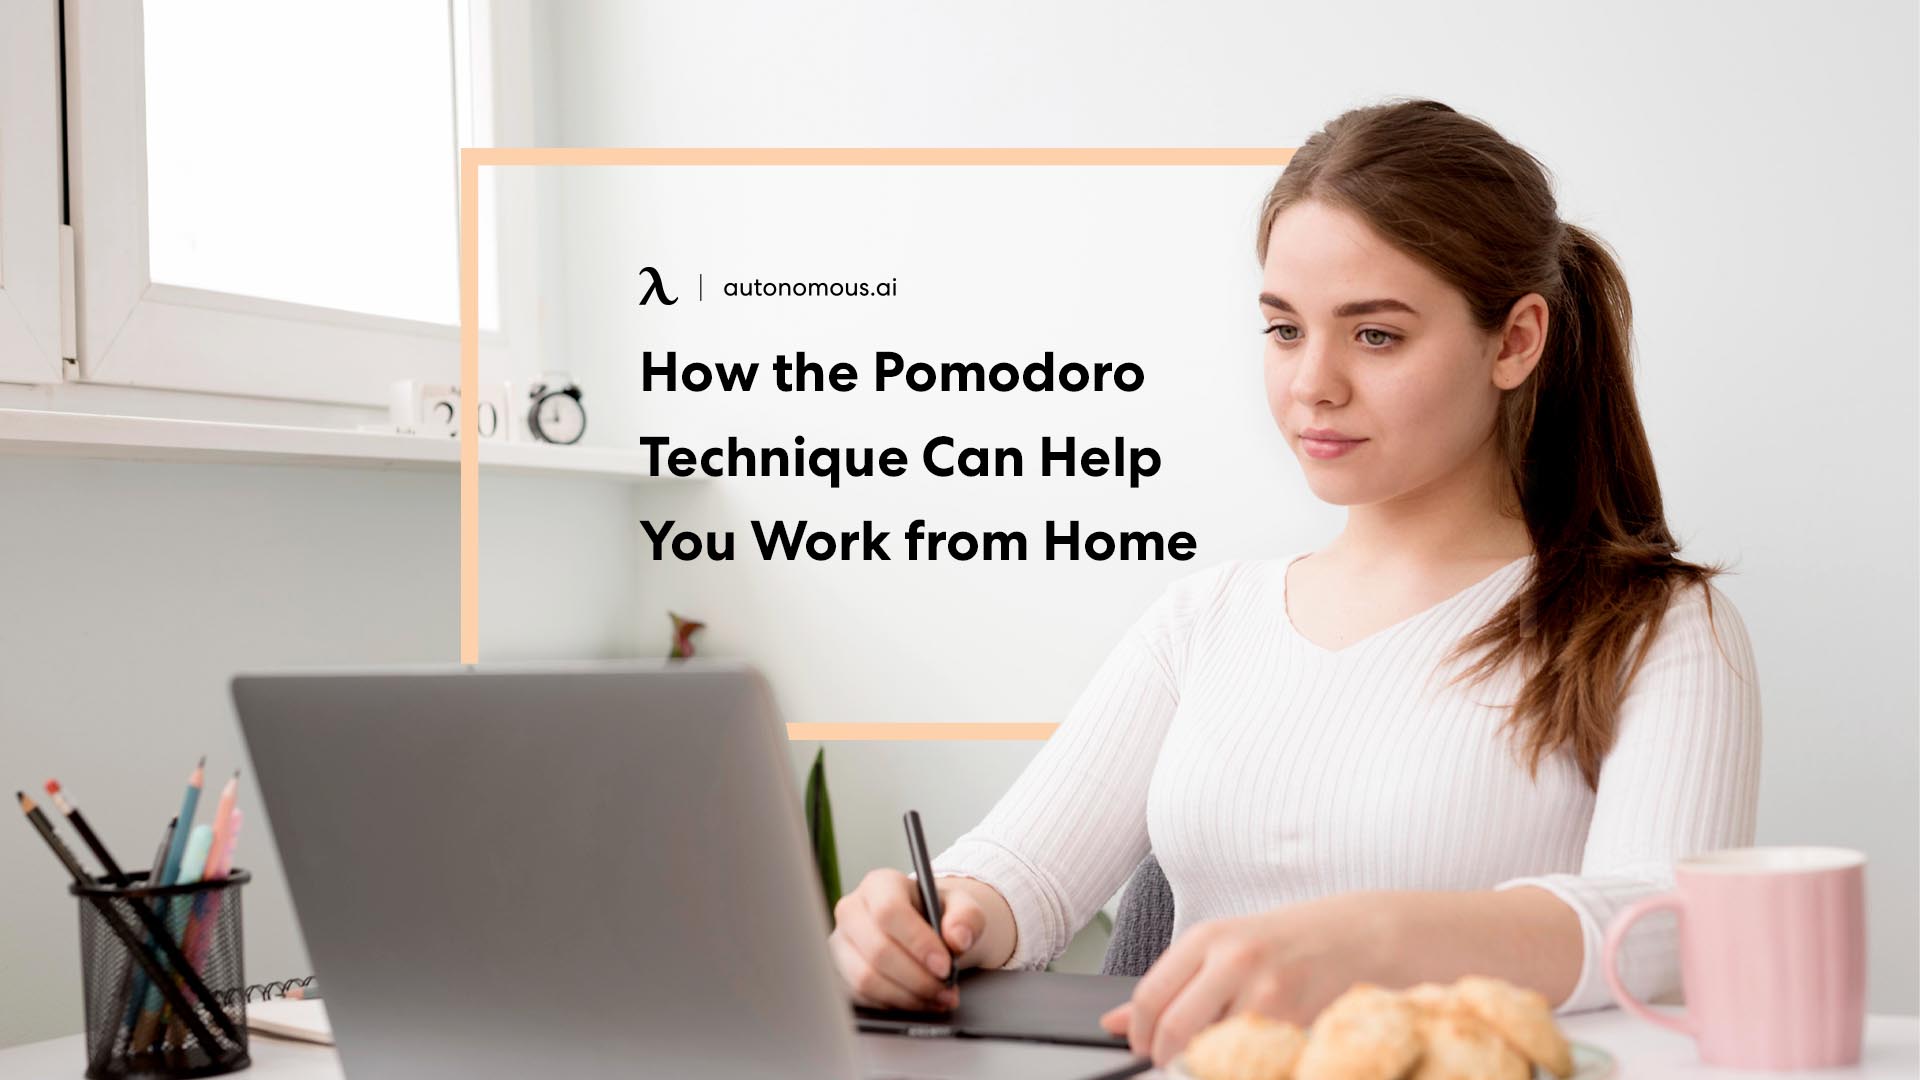 How the Pomodoro Technique can Help You Work from Home